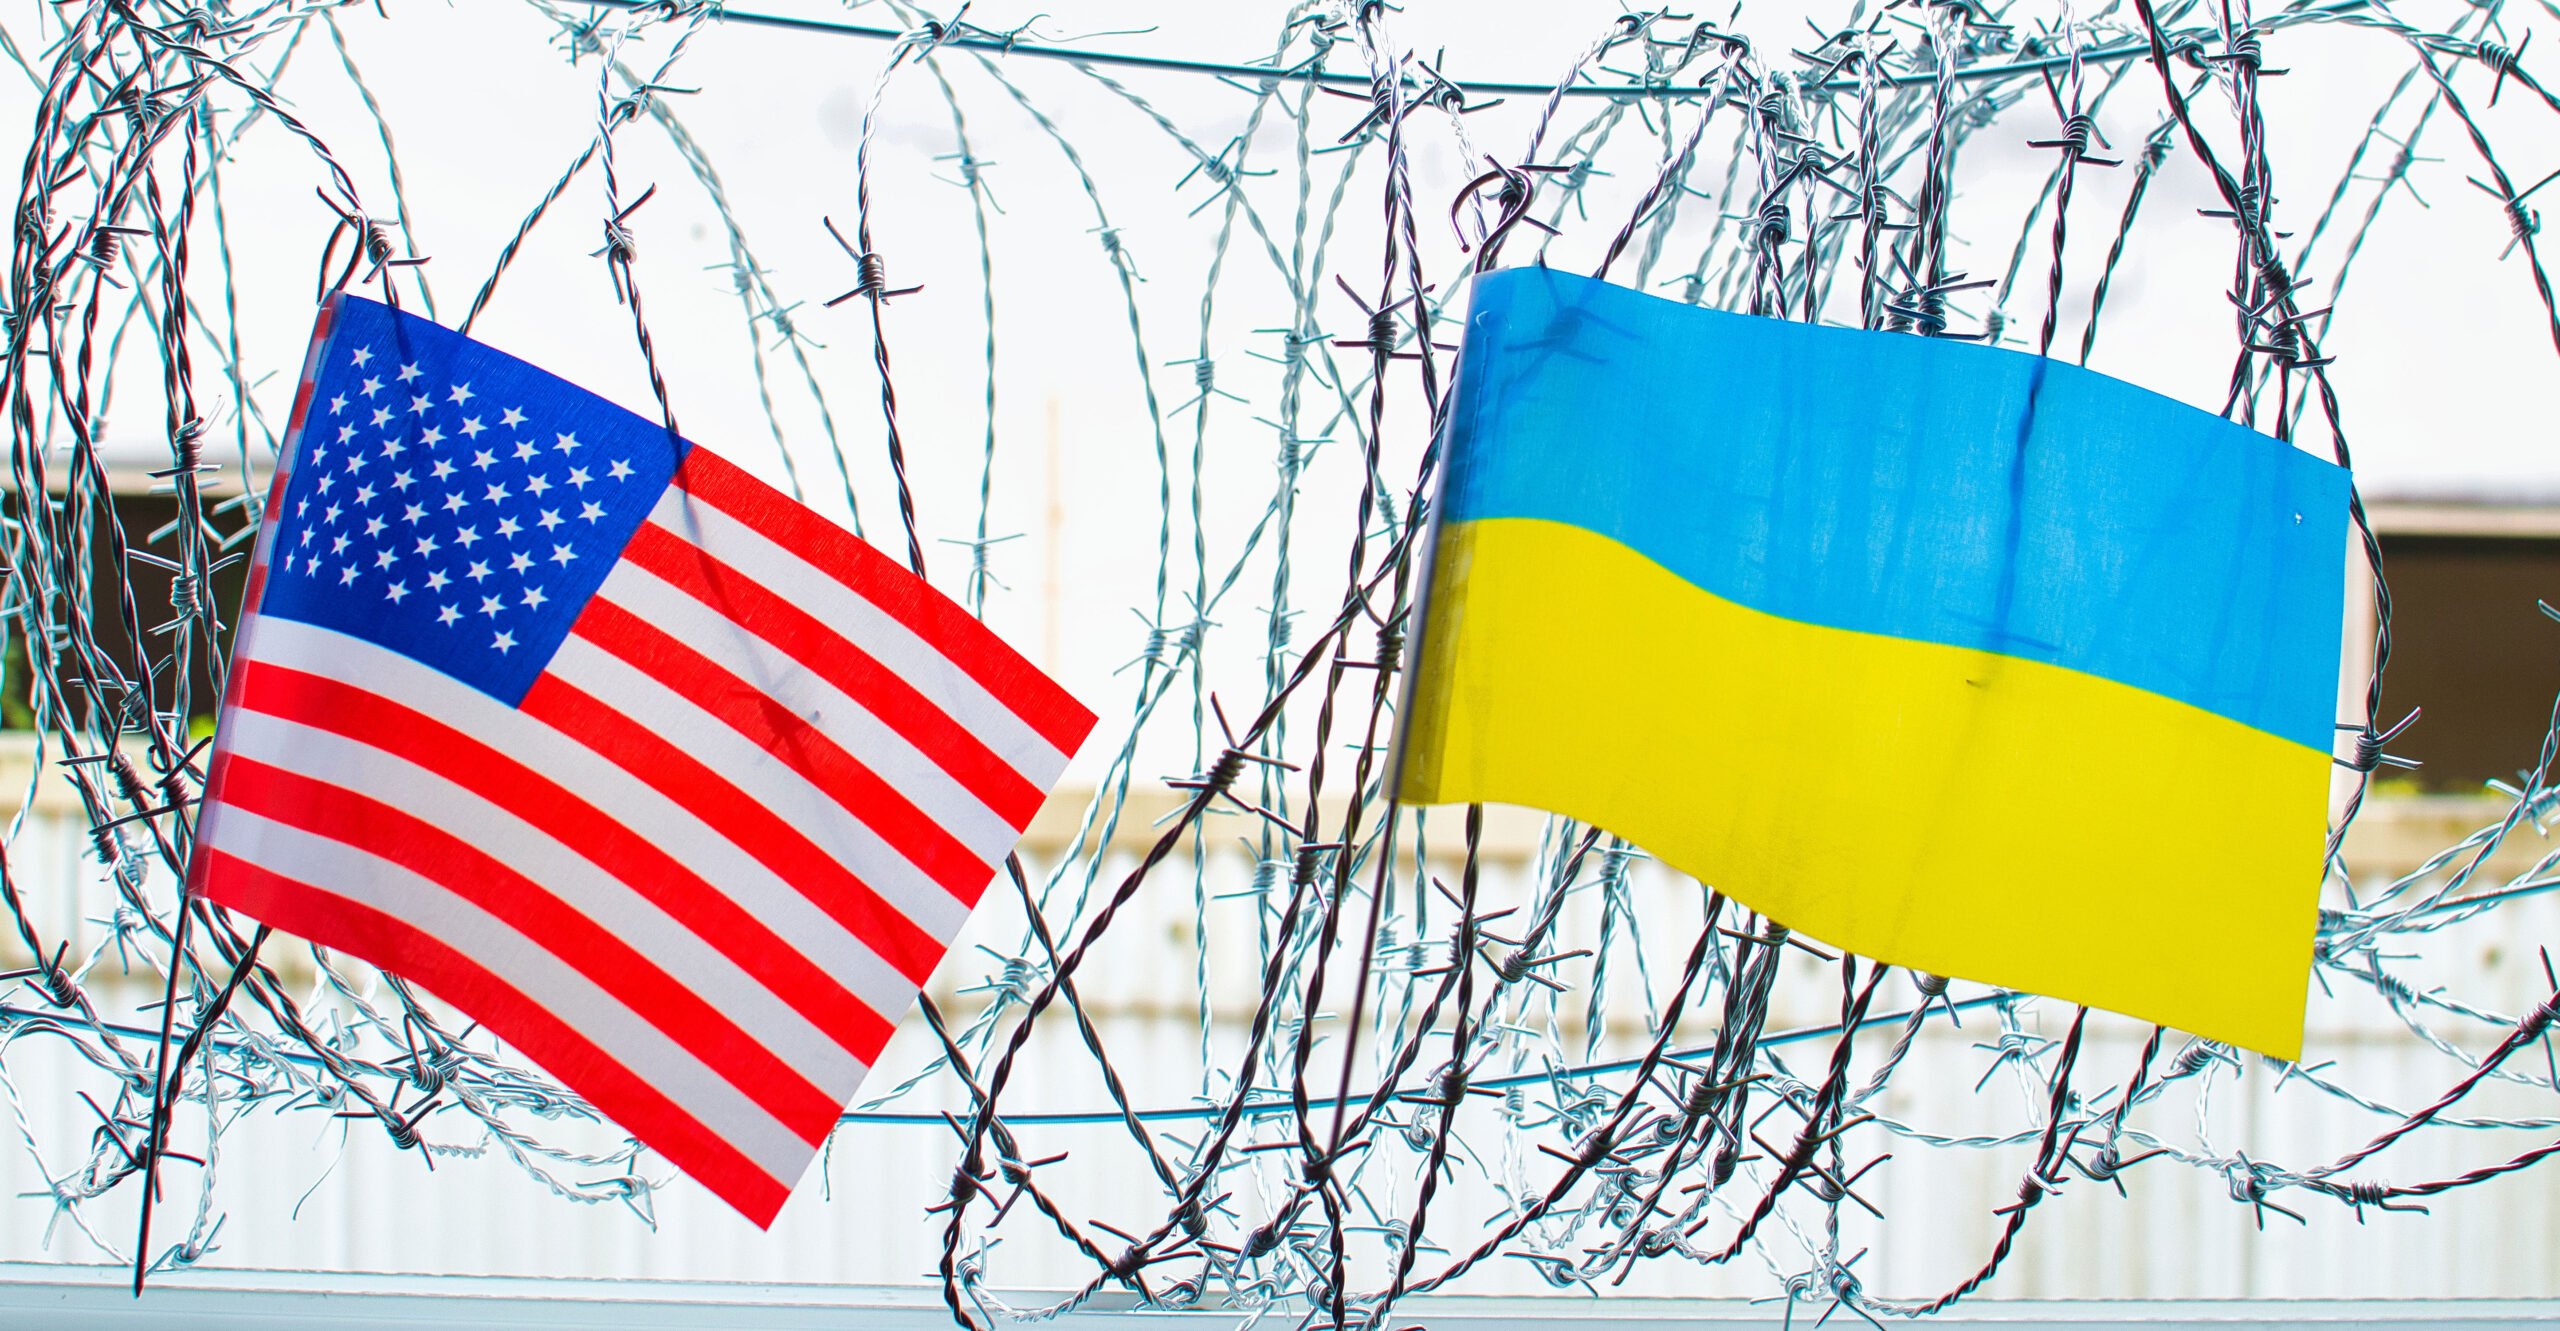 $113.4B vs. $37.8B: Congress Spent 3 Times as Much on Ukraine as on Customs and Border Protection